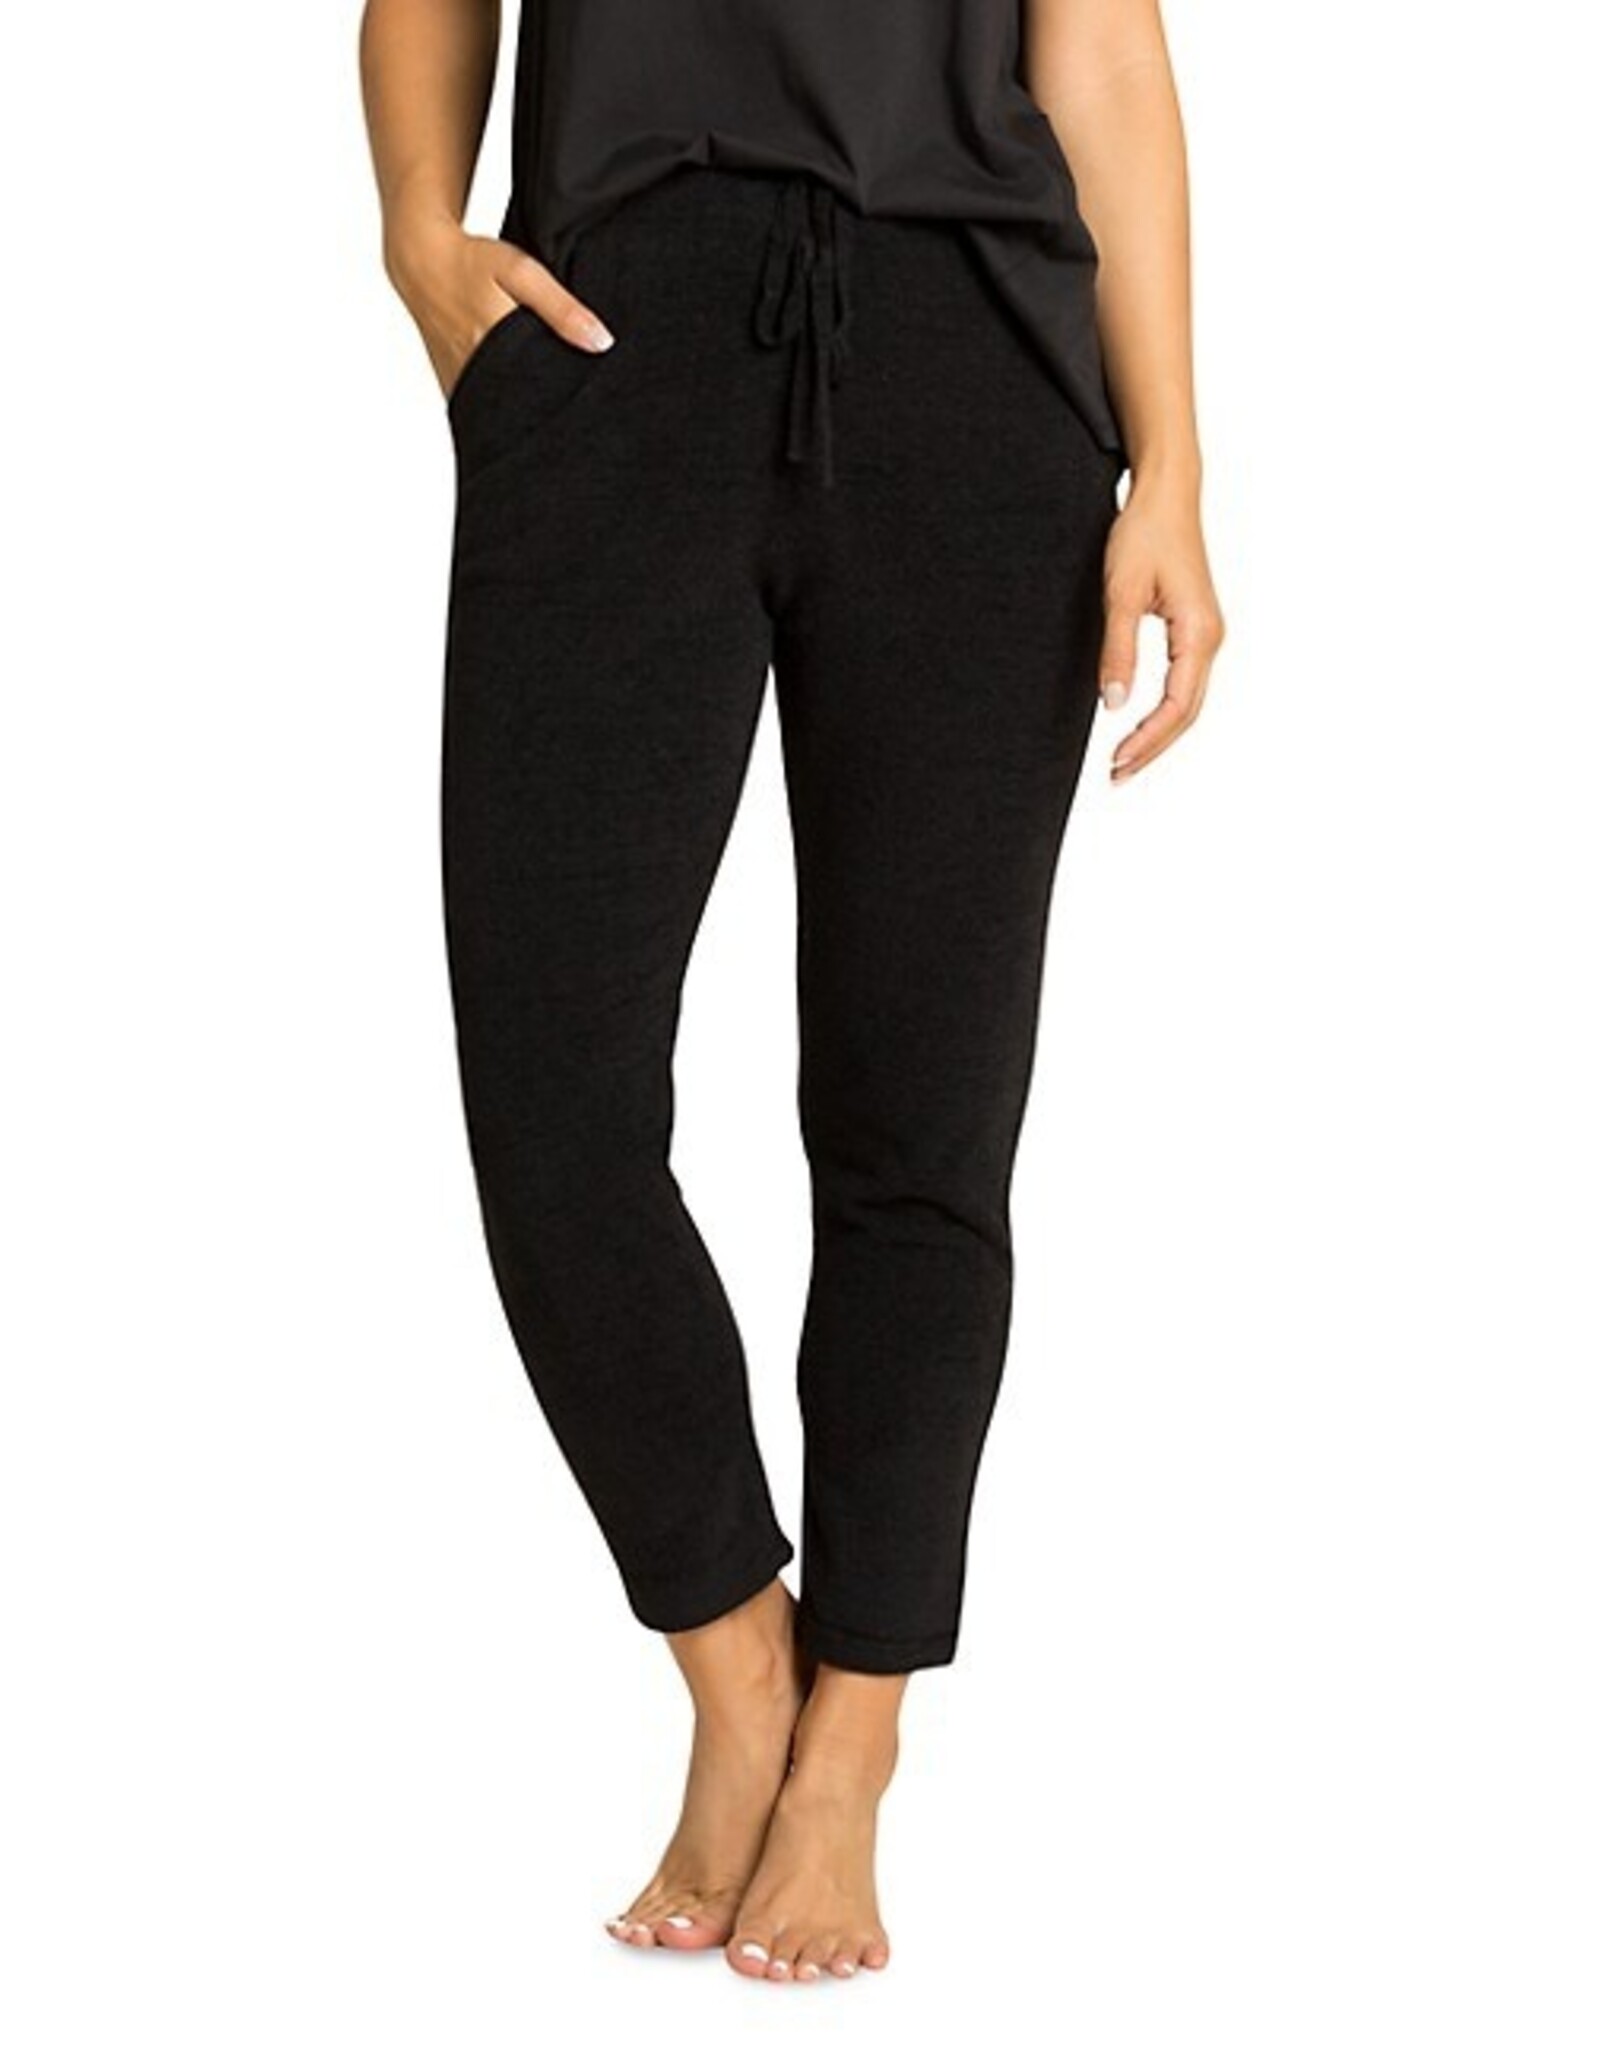 Barefoot Dreams CozyChic Ultra Lite® Everyday Pants in Black